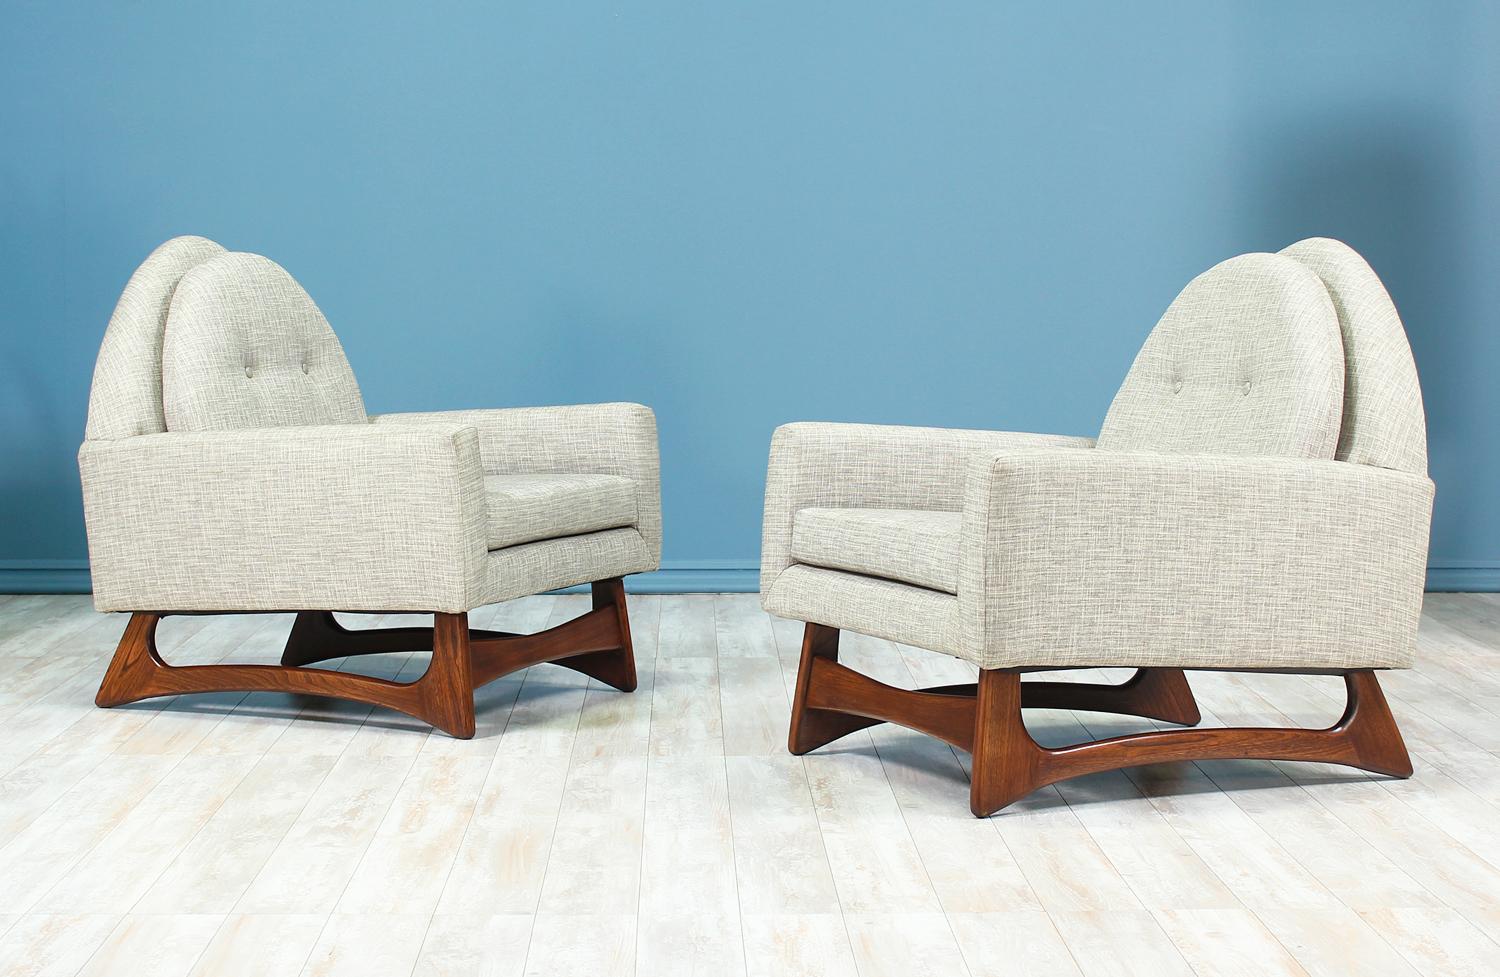 A pair of lounge chairs designed by Adrian Pearsall for Craft Associates in the United States circa 1960s. These lounge chairs feature a sculpted walnut wood base with solid stretchers that create a durable foundation for lasting comfort. The loose